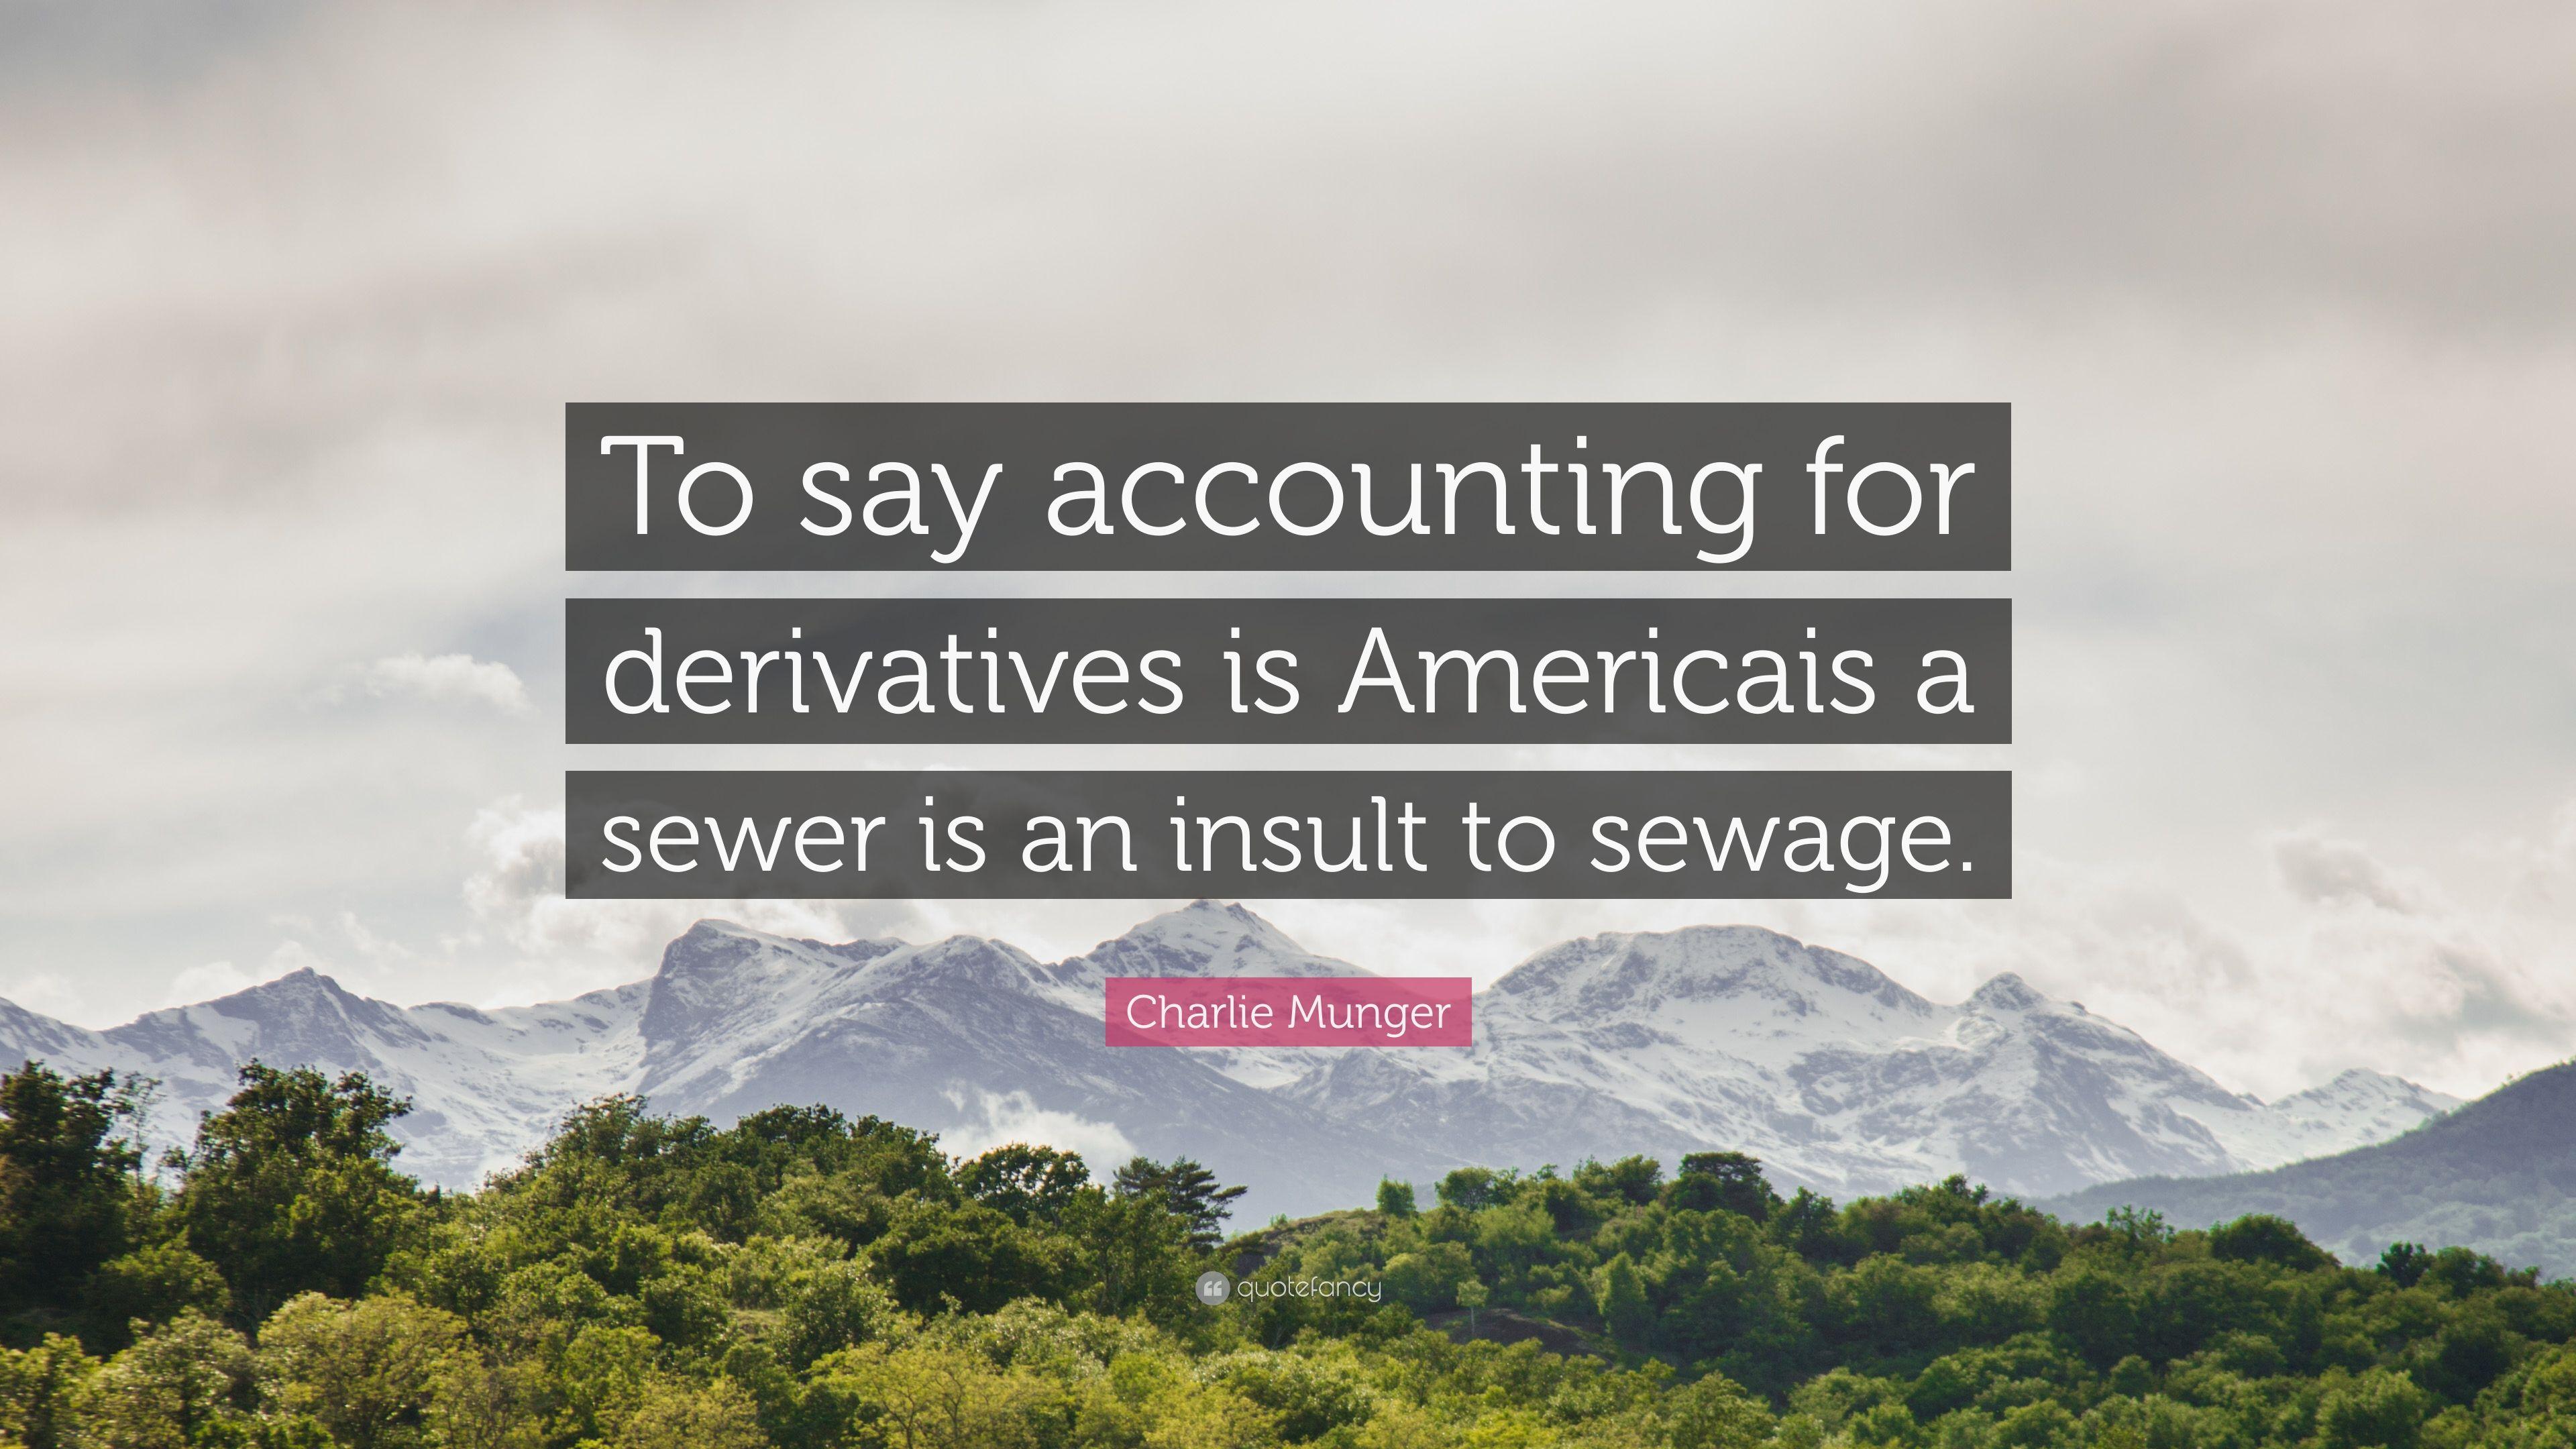 Charlie Munger Quote: “To say accounting for derivatives is